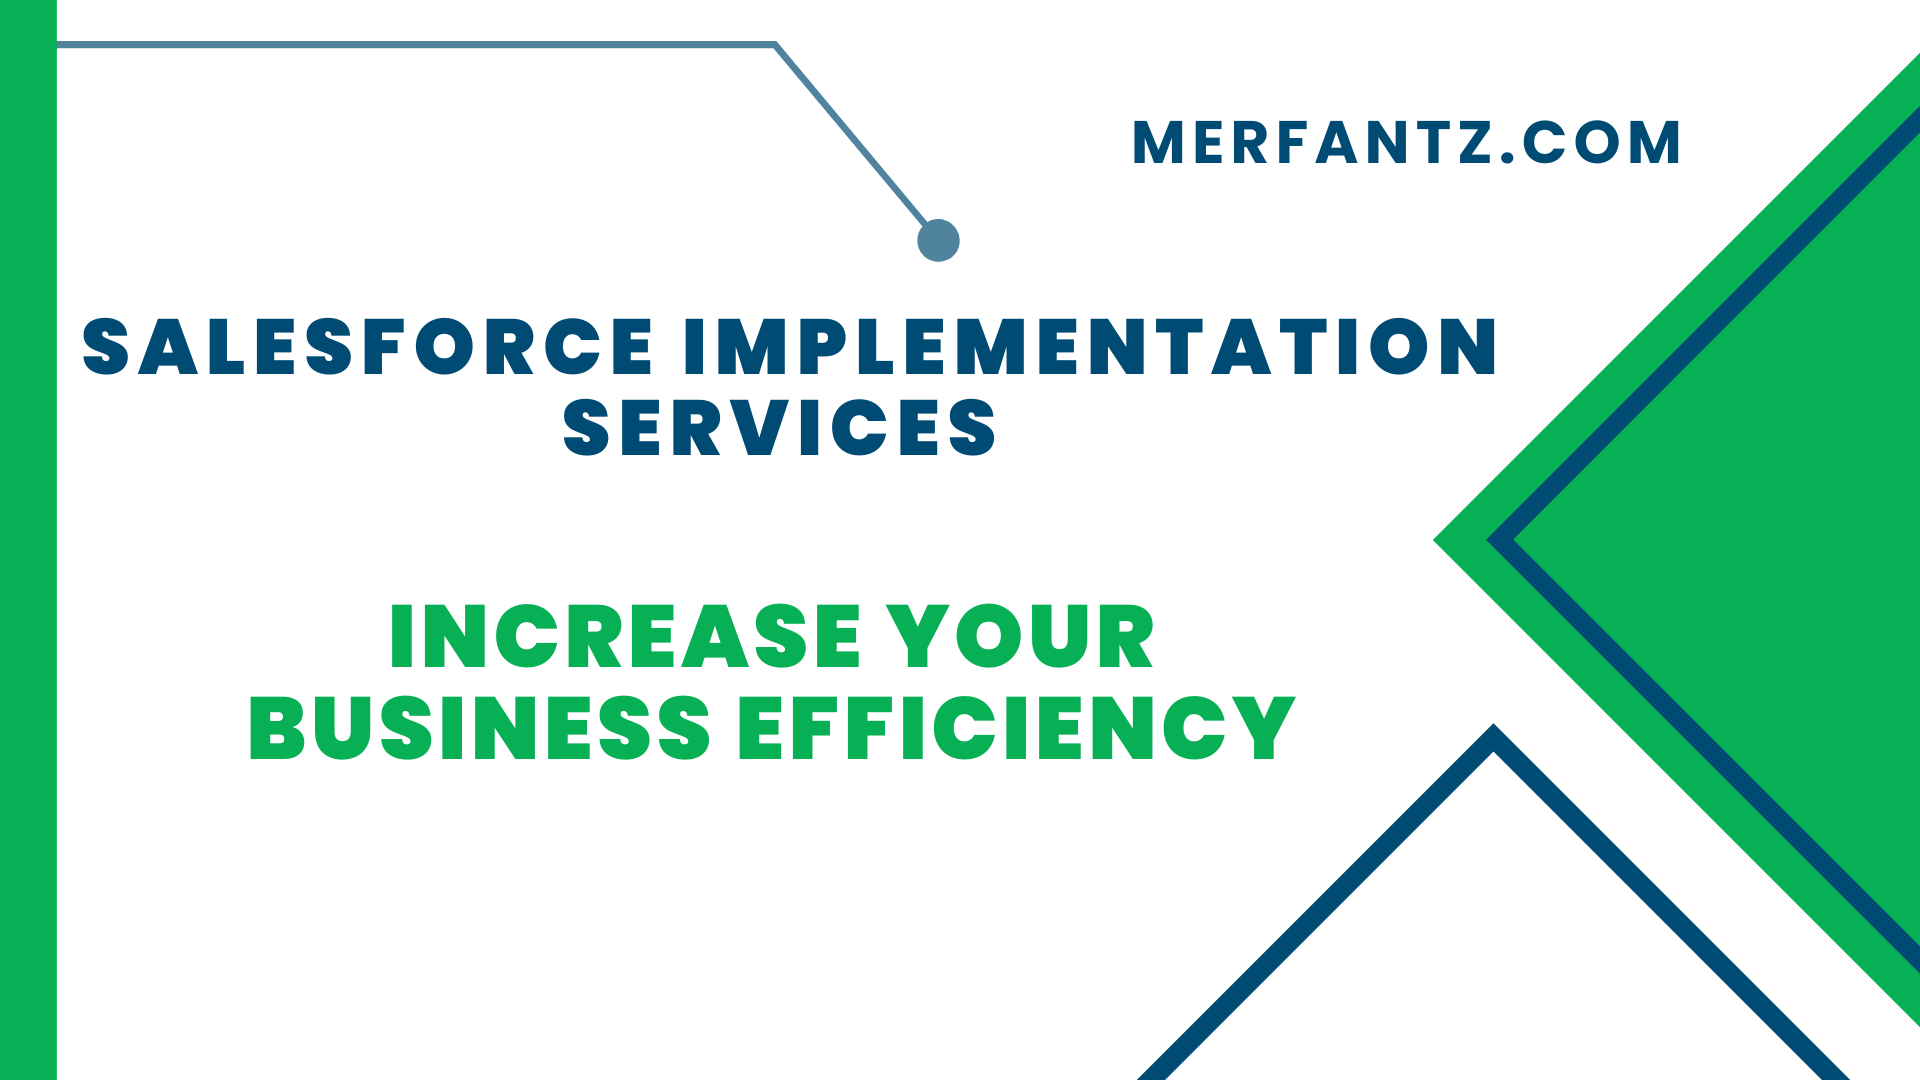 Salesforce Implementation Services  Increase Your Business Efficiency